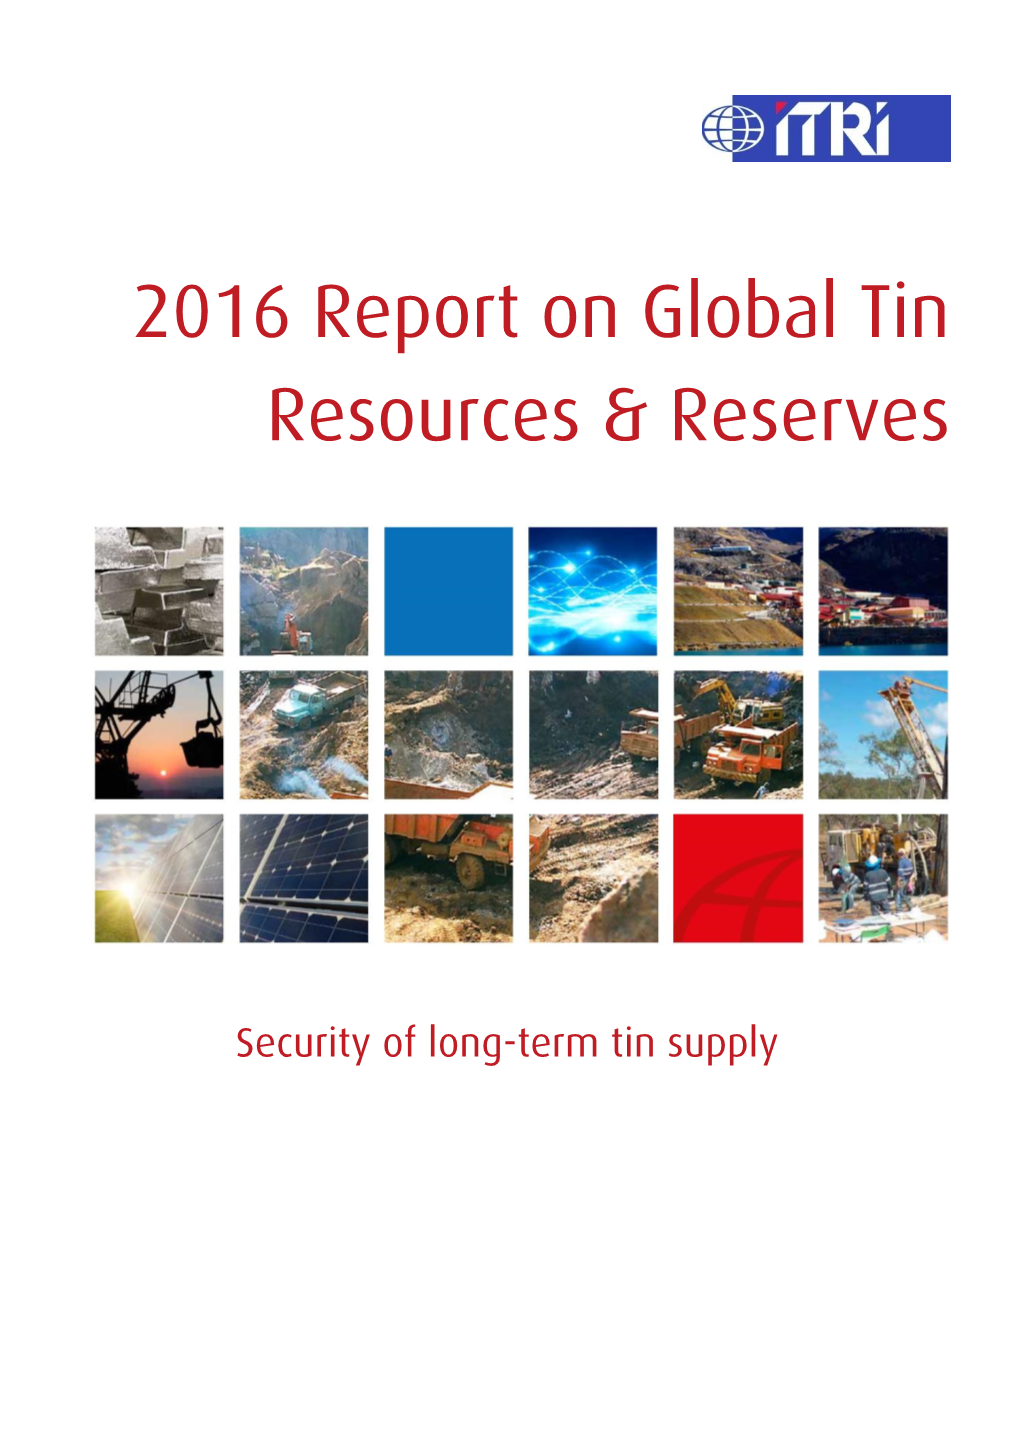 2016 Report on Global Tin Resources & Reserves